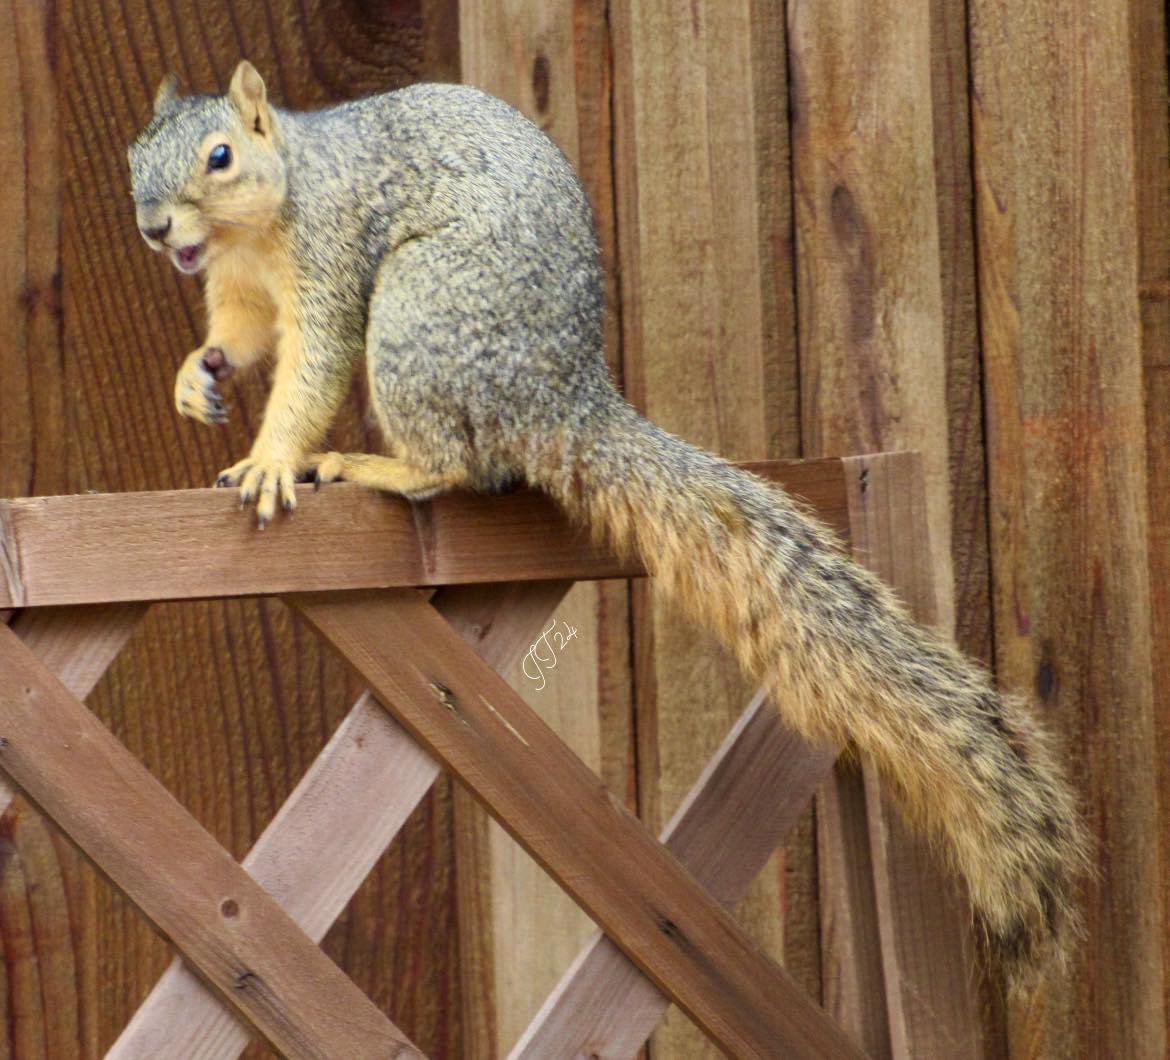 Got a thumbs up 👍🏻 from the squirrel this morning…. 😁